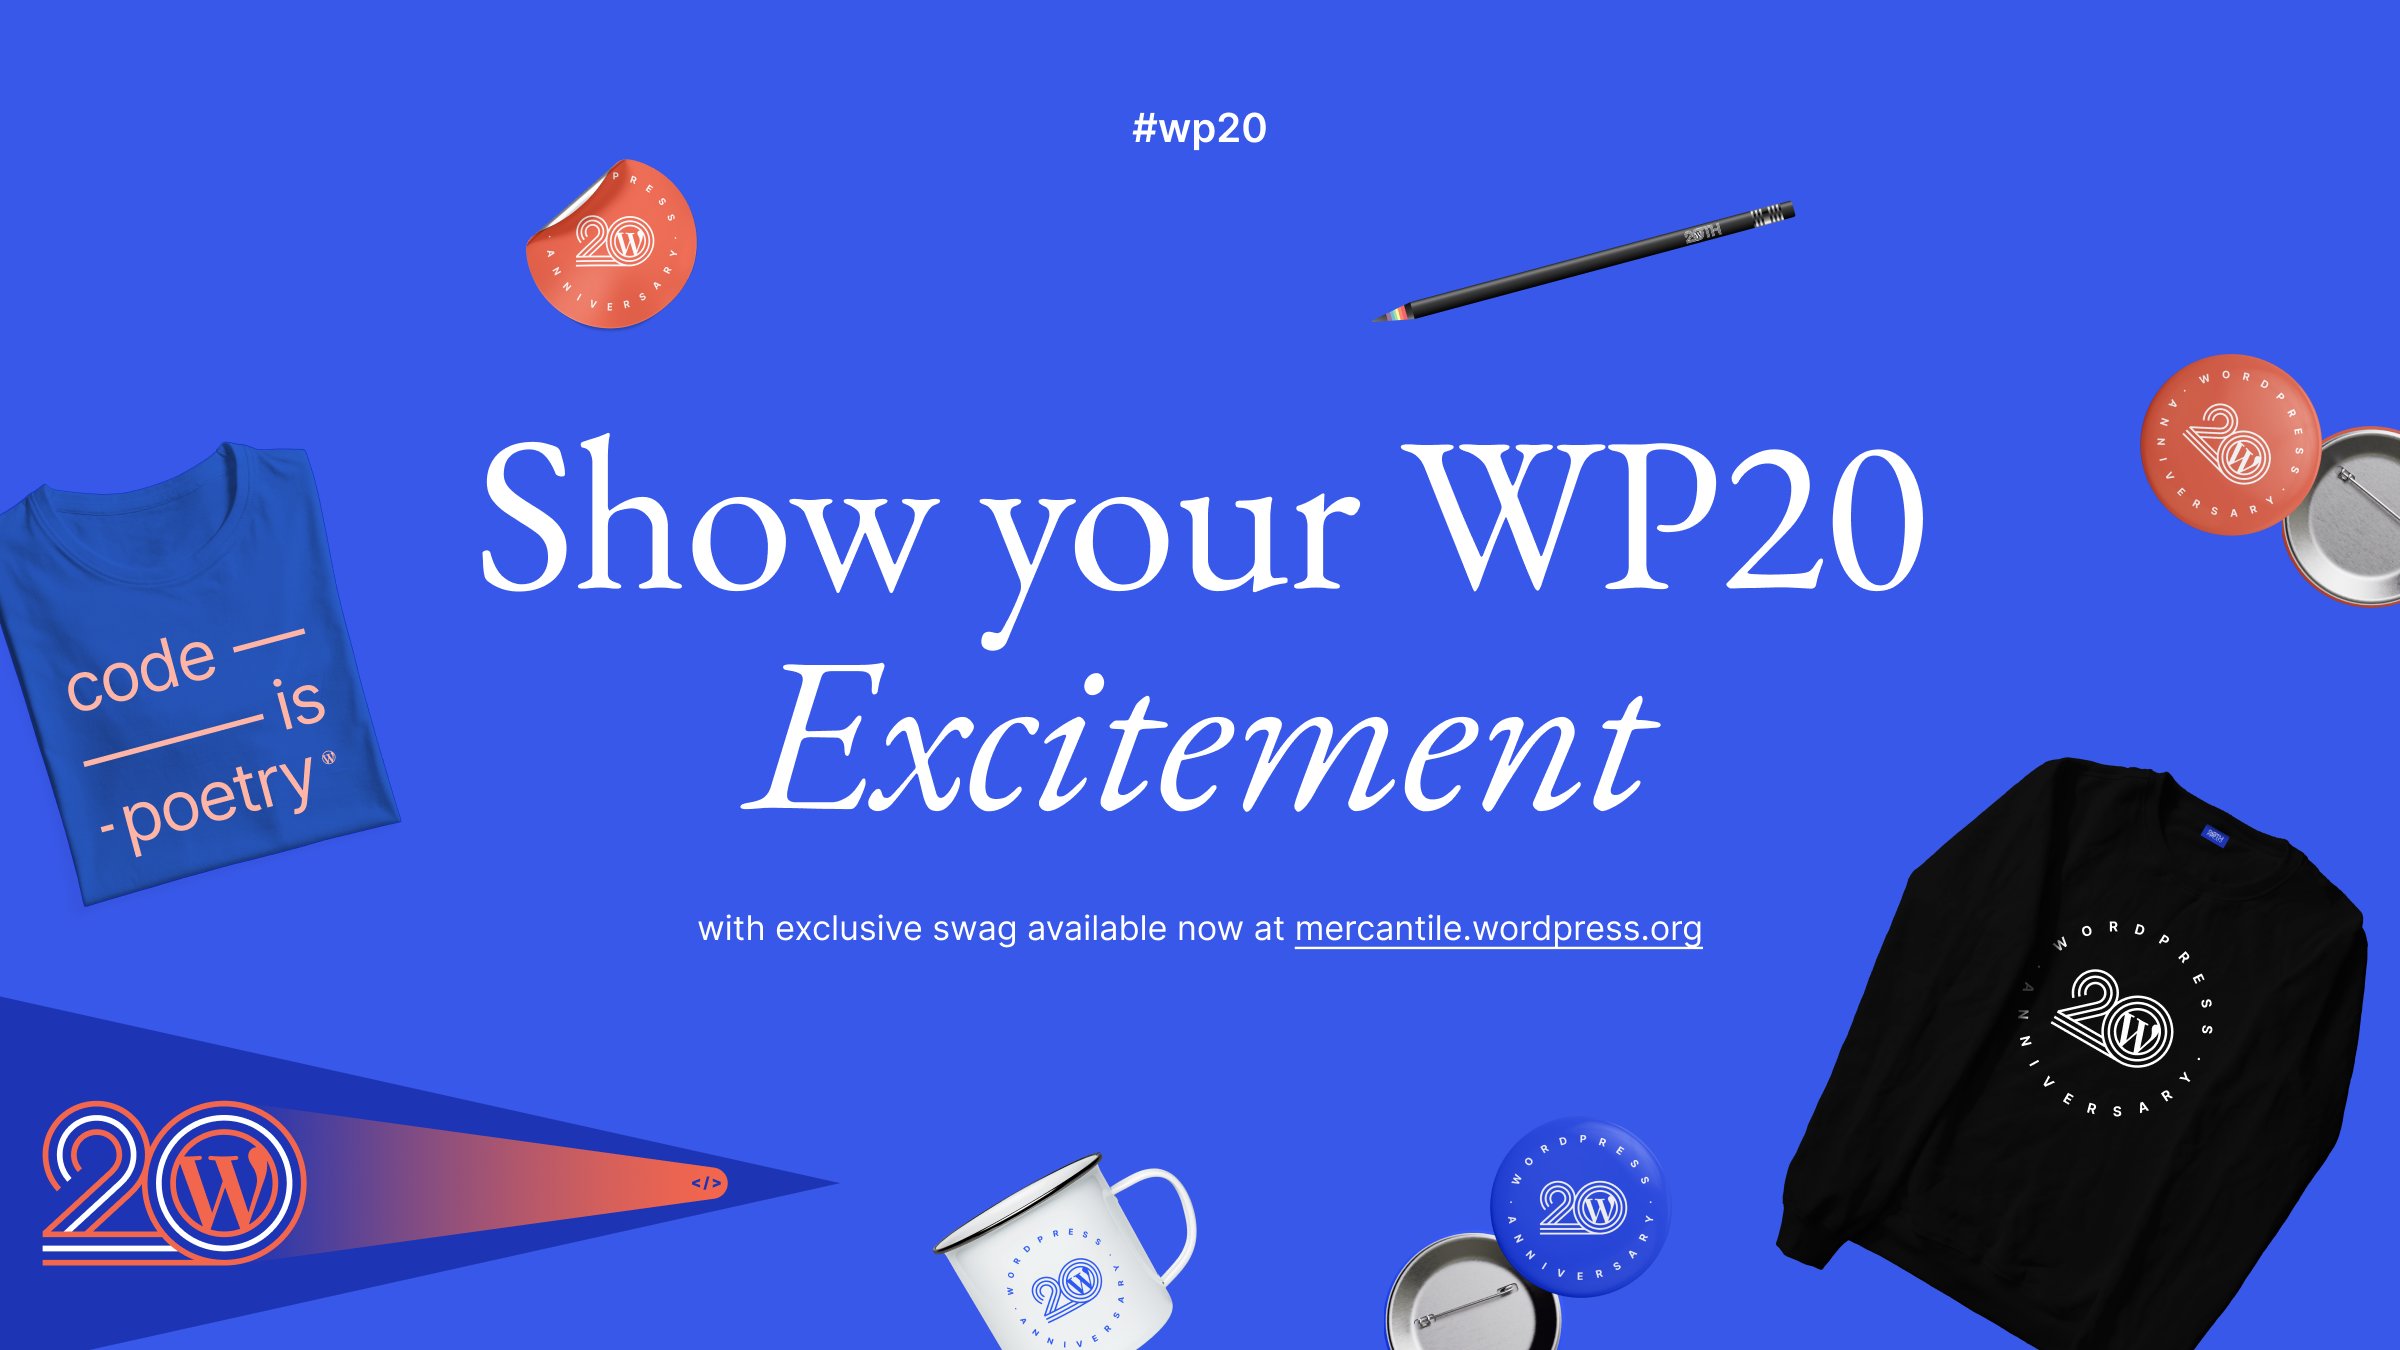 Blue background with images of WordPress 20th anniversary limited edition swag items and text, "#wp20, Show your WP20 Excitement. With exclusive swage available at mercantile.wordpress.org" 